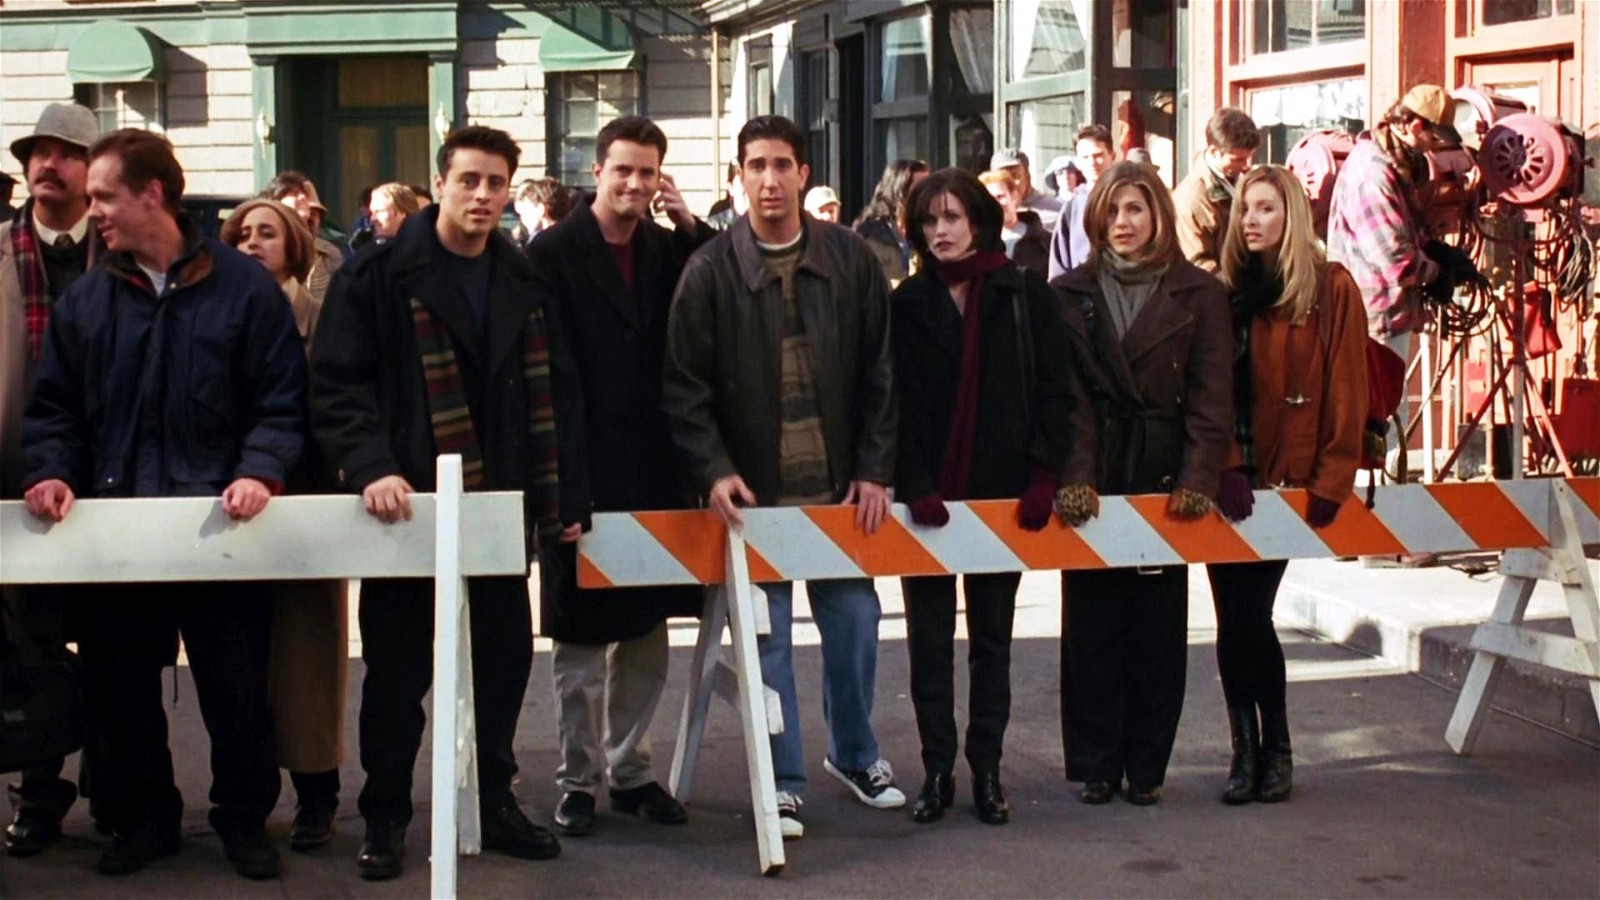 The cast in a still from The One After The Super Bowl episode in Friends 